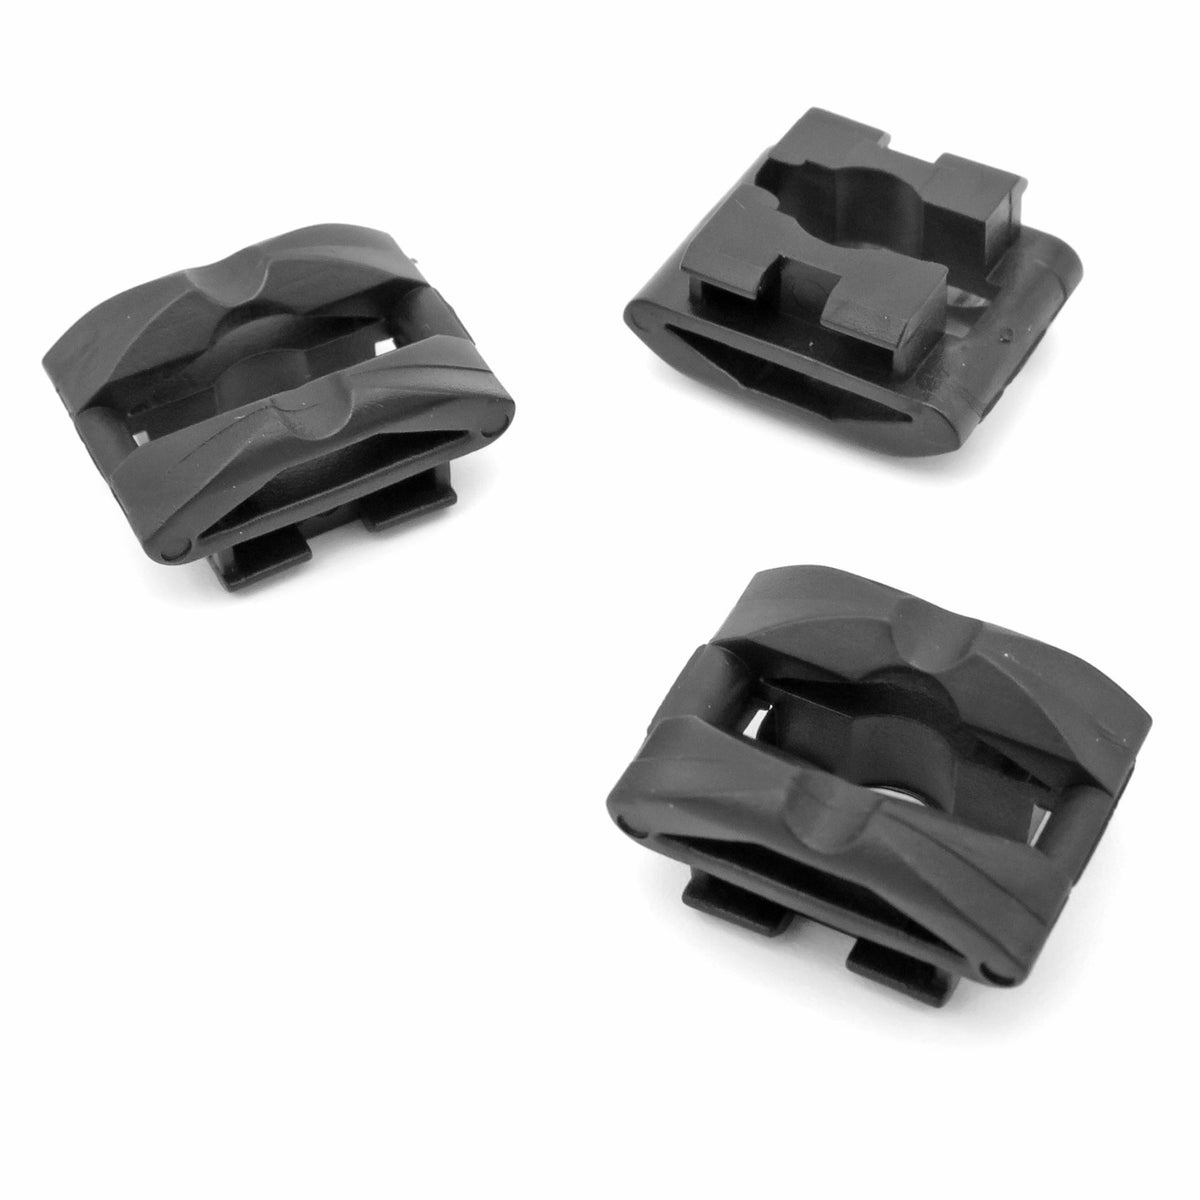 Retaining Clip for Twist Lock Bolt, Towing Cover, Land Rover